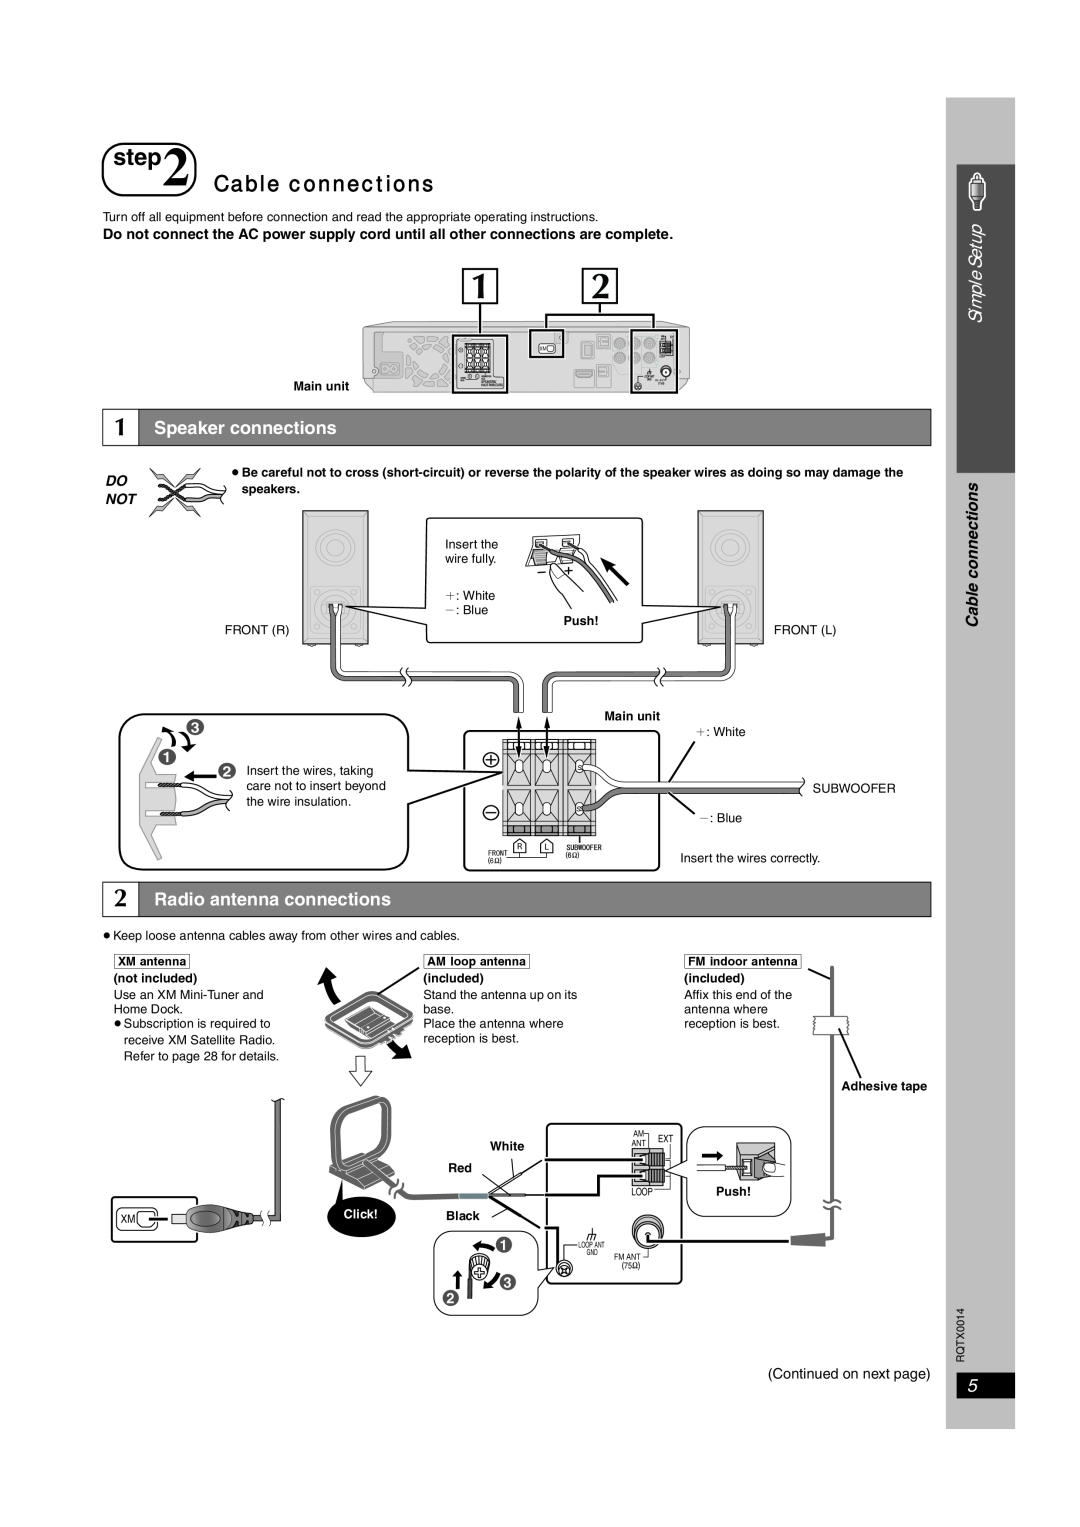 Panasonic SC-PTX5 manual Cable connections, Speaker connections, Radio antenna connections, Simple Setup, XM\antenna 